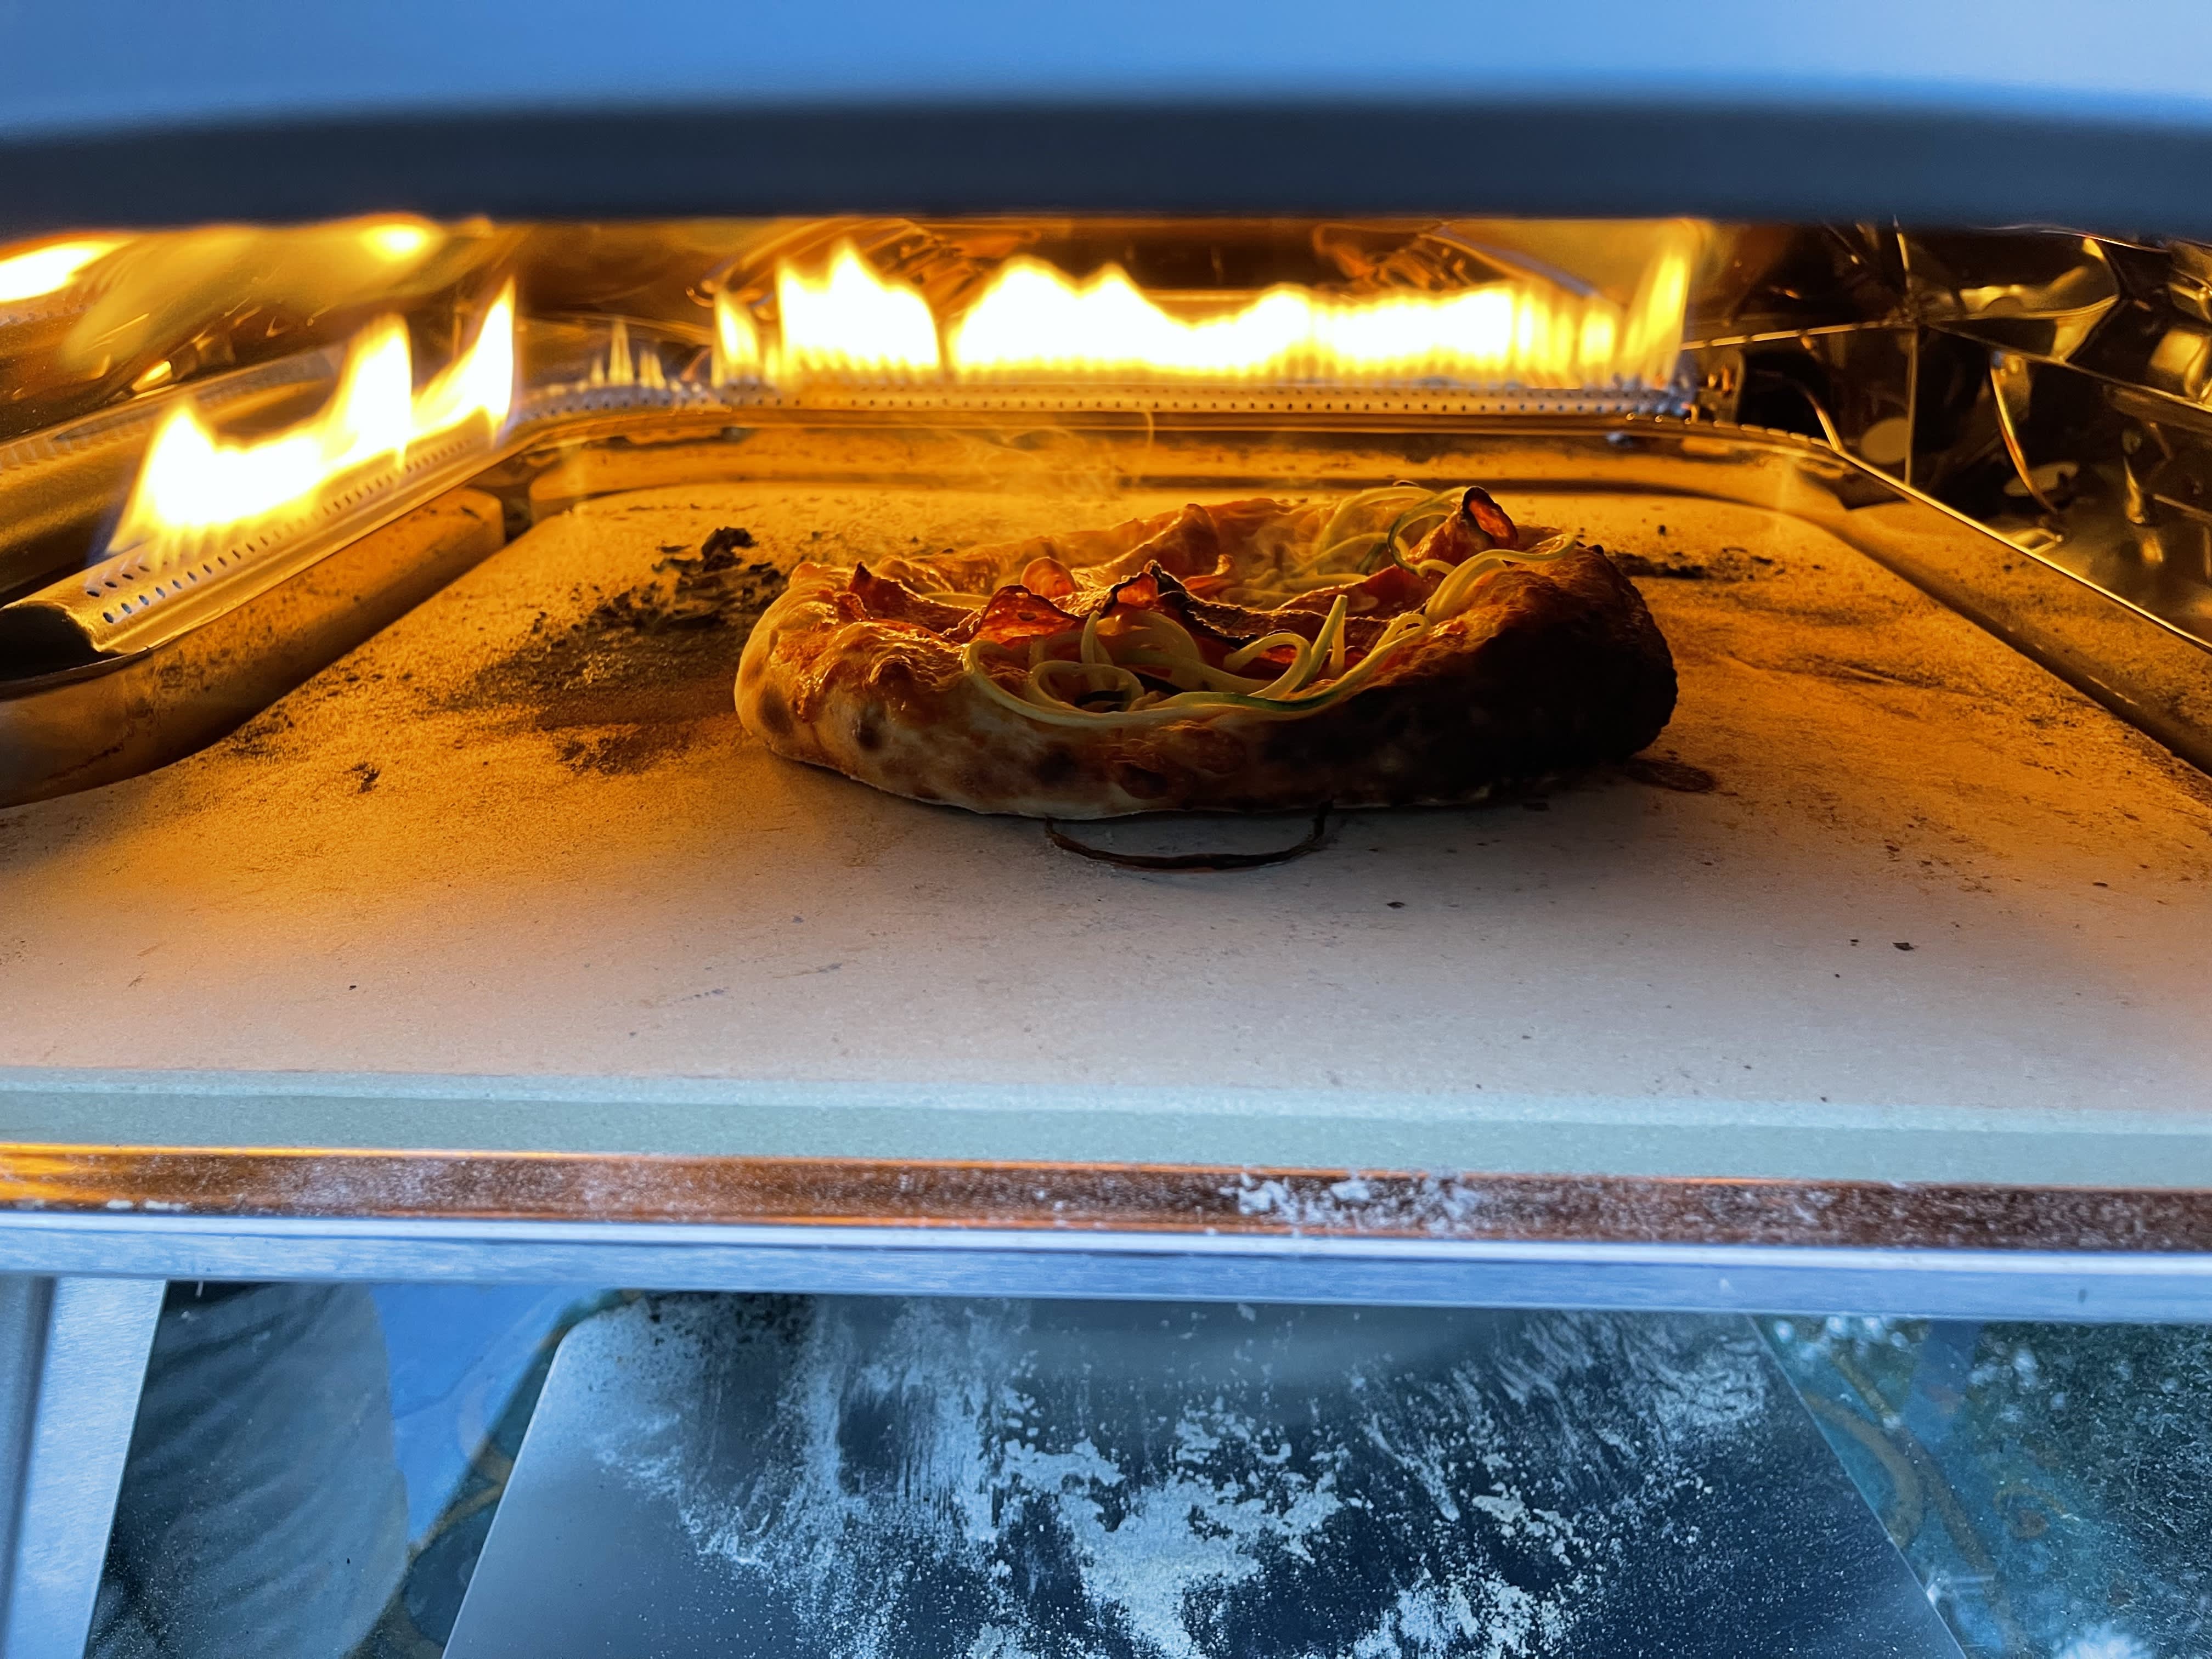 Ooni pizza oven review: These are the GHI's top-rated Ooni pizza ovens